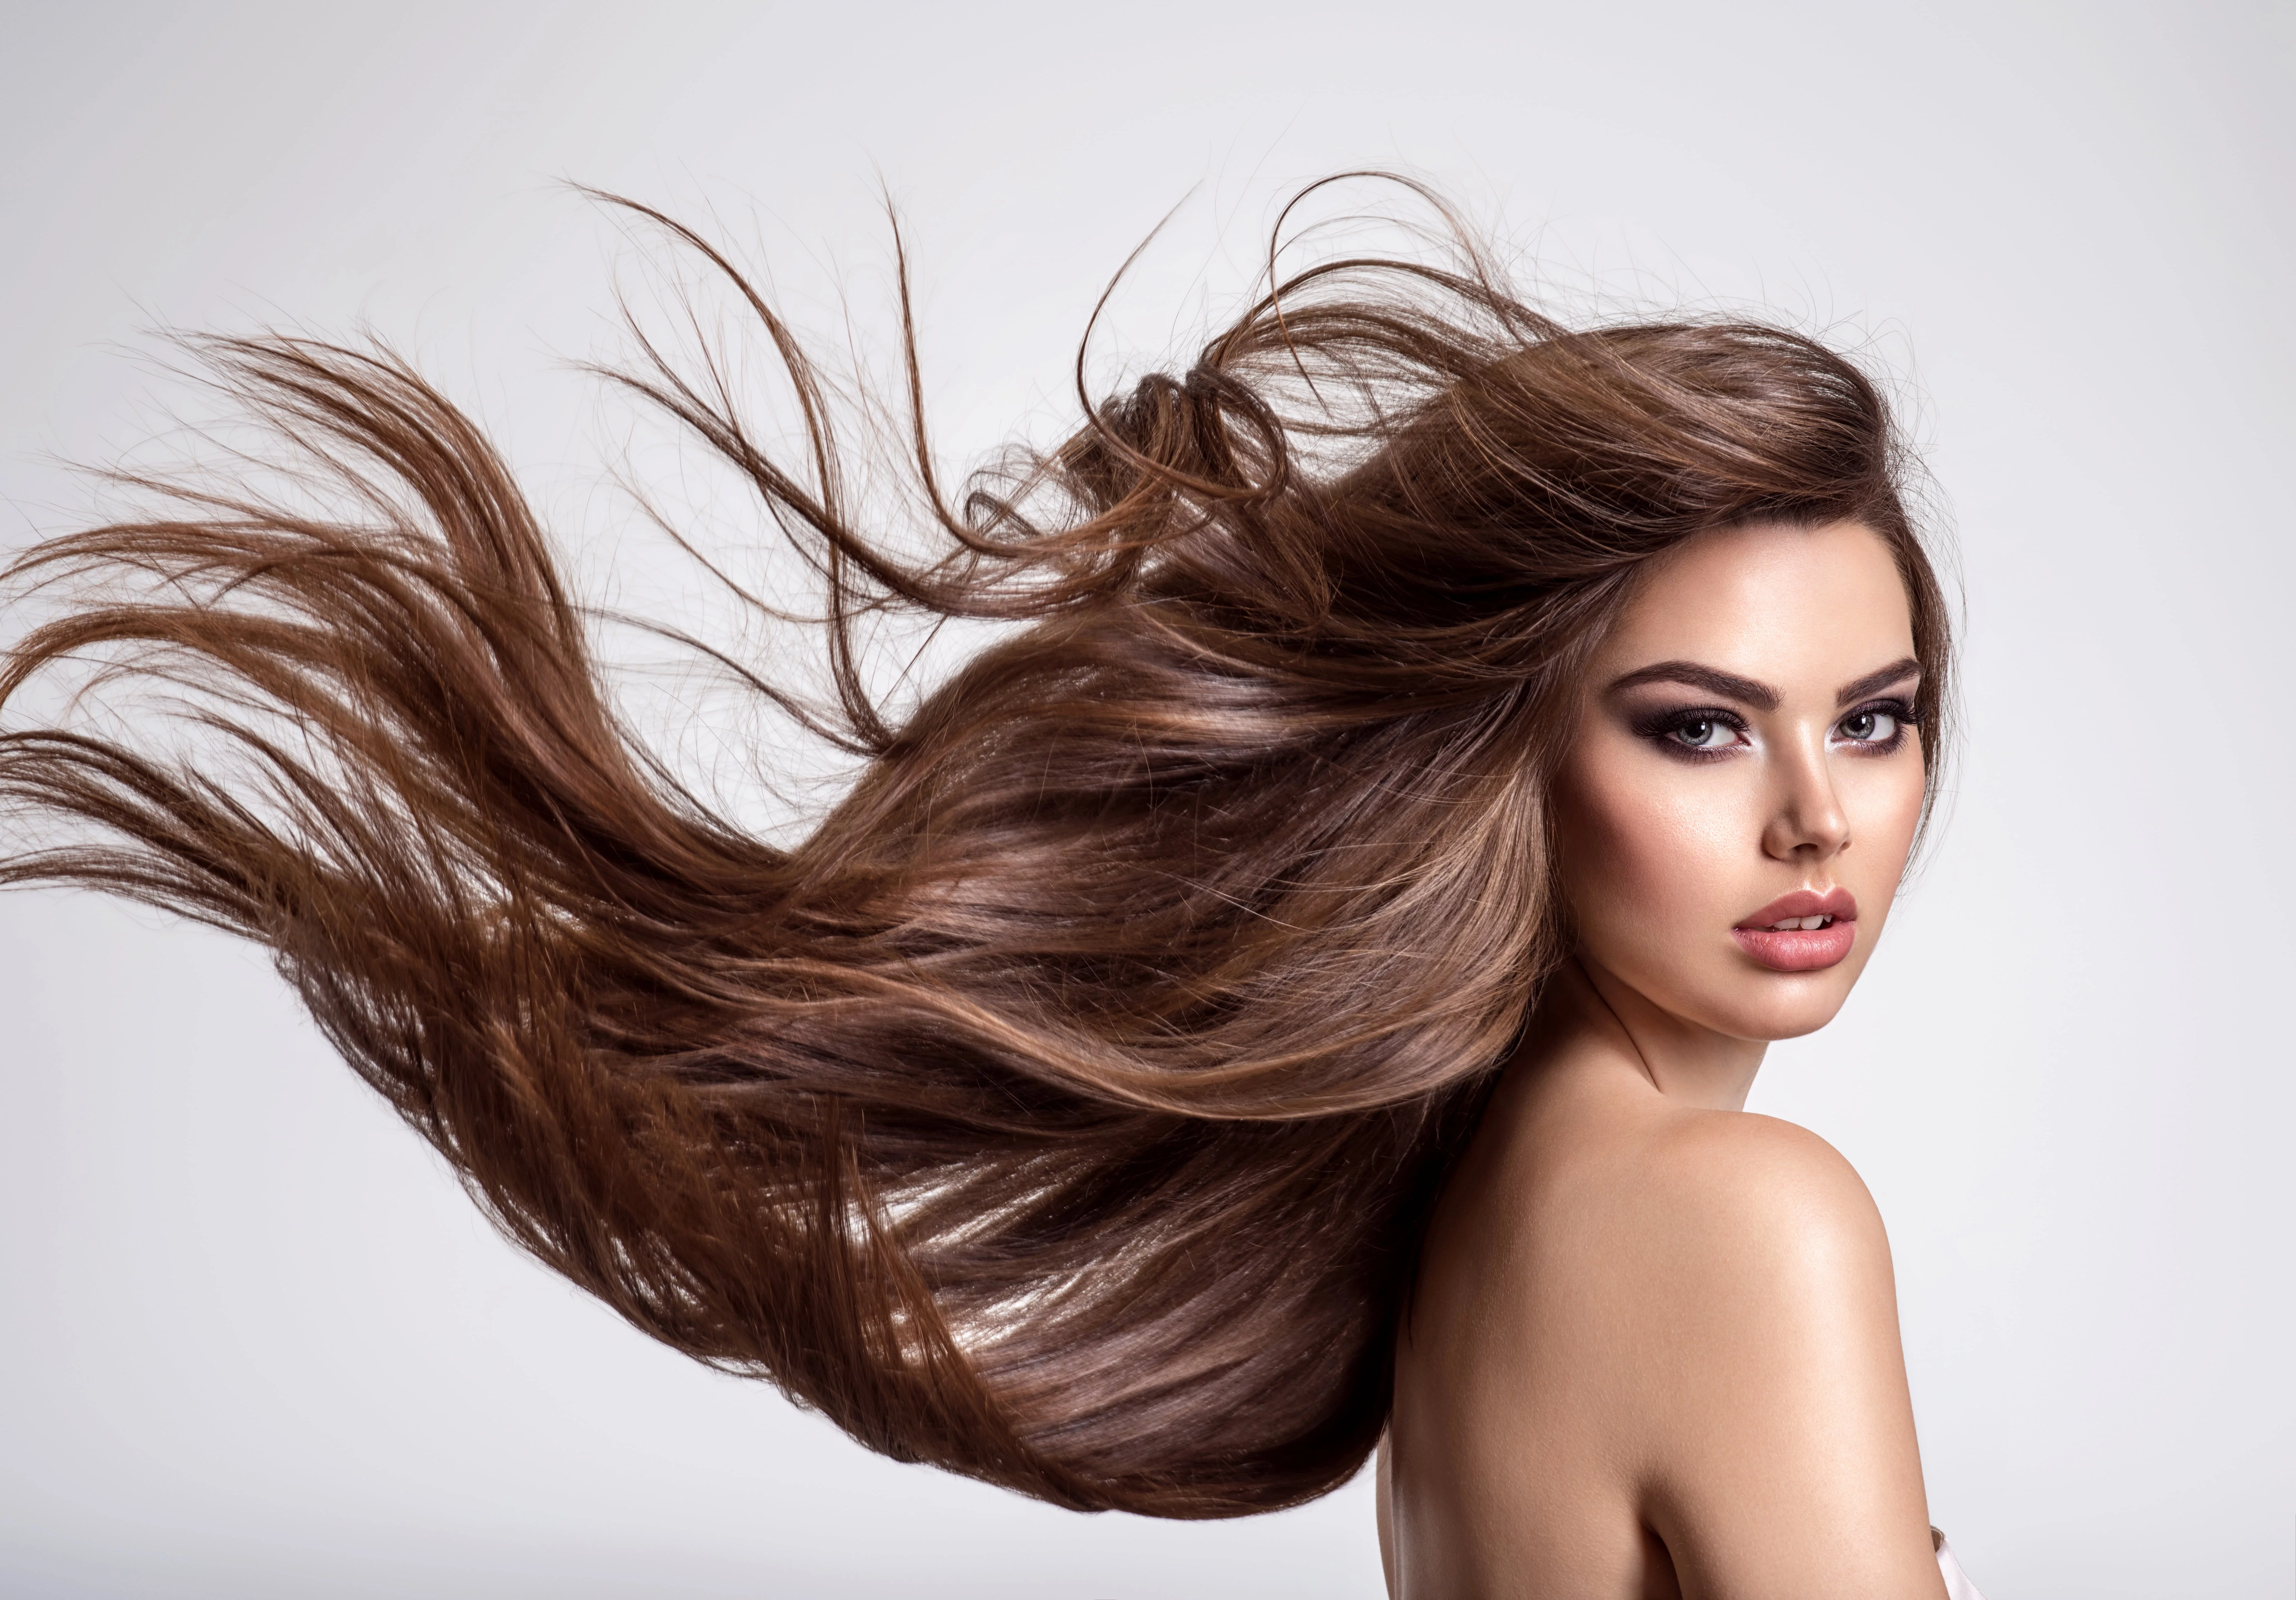 7 Most Effective Ways to Prevent Split Ends